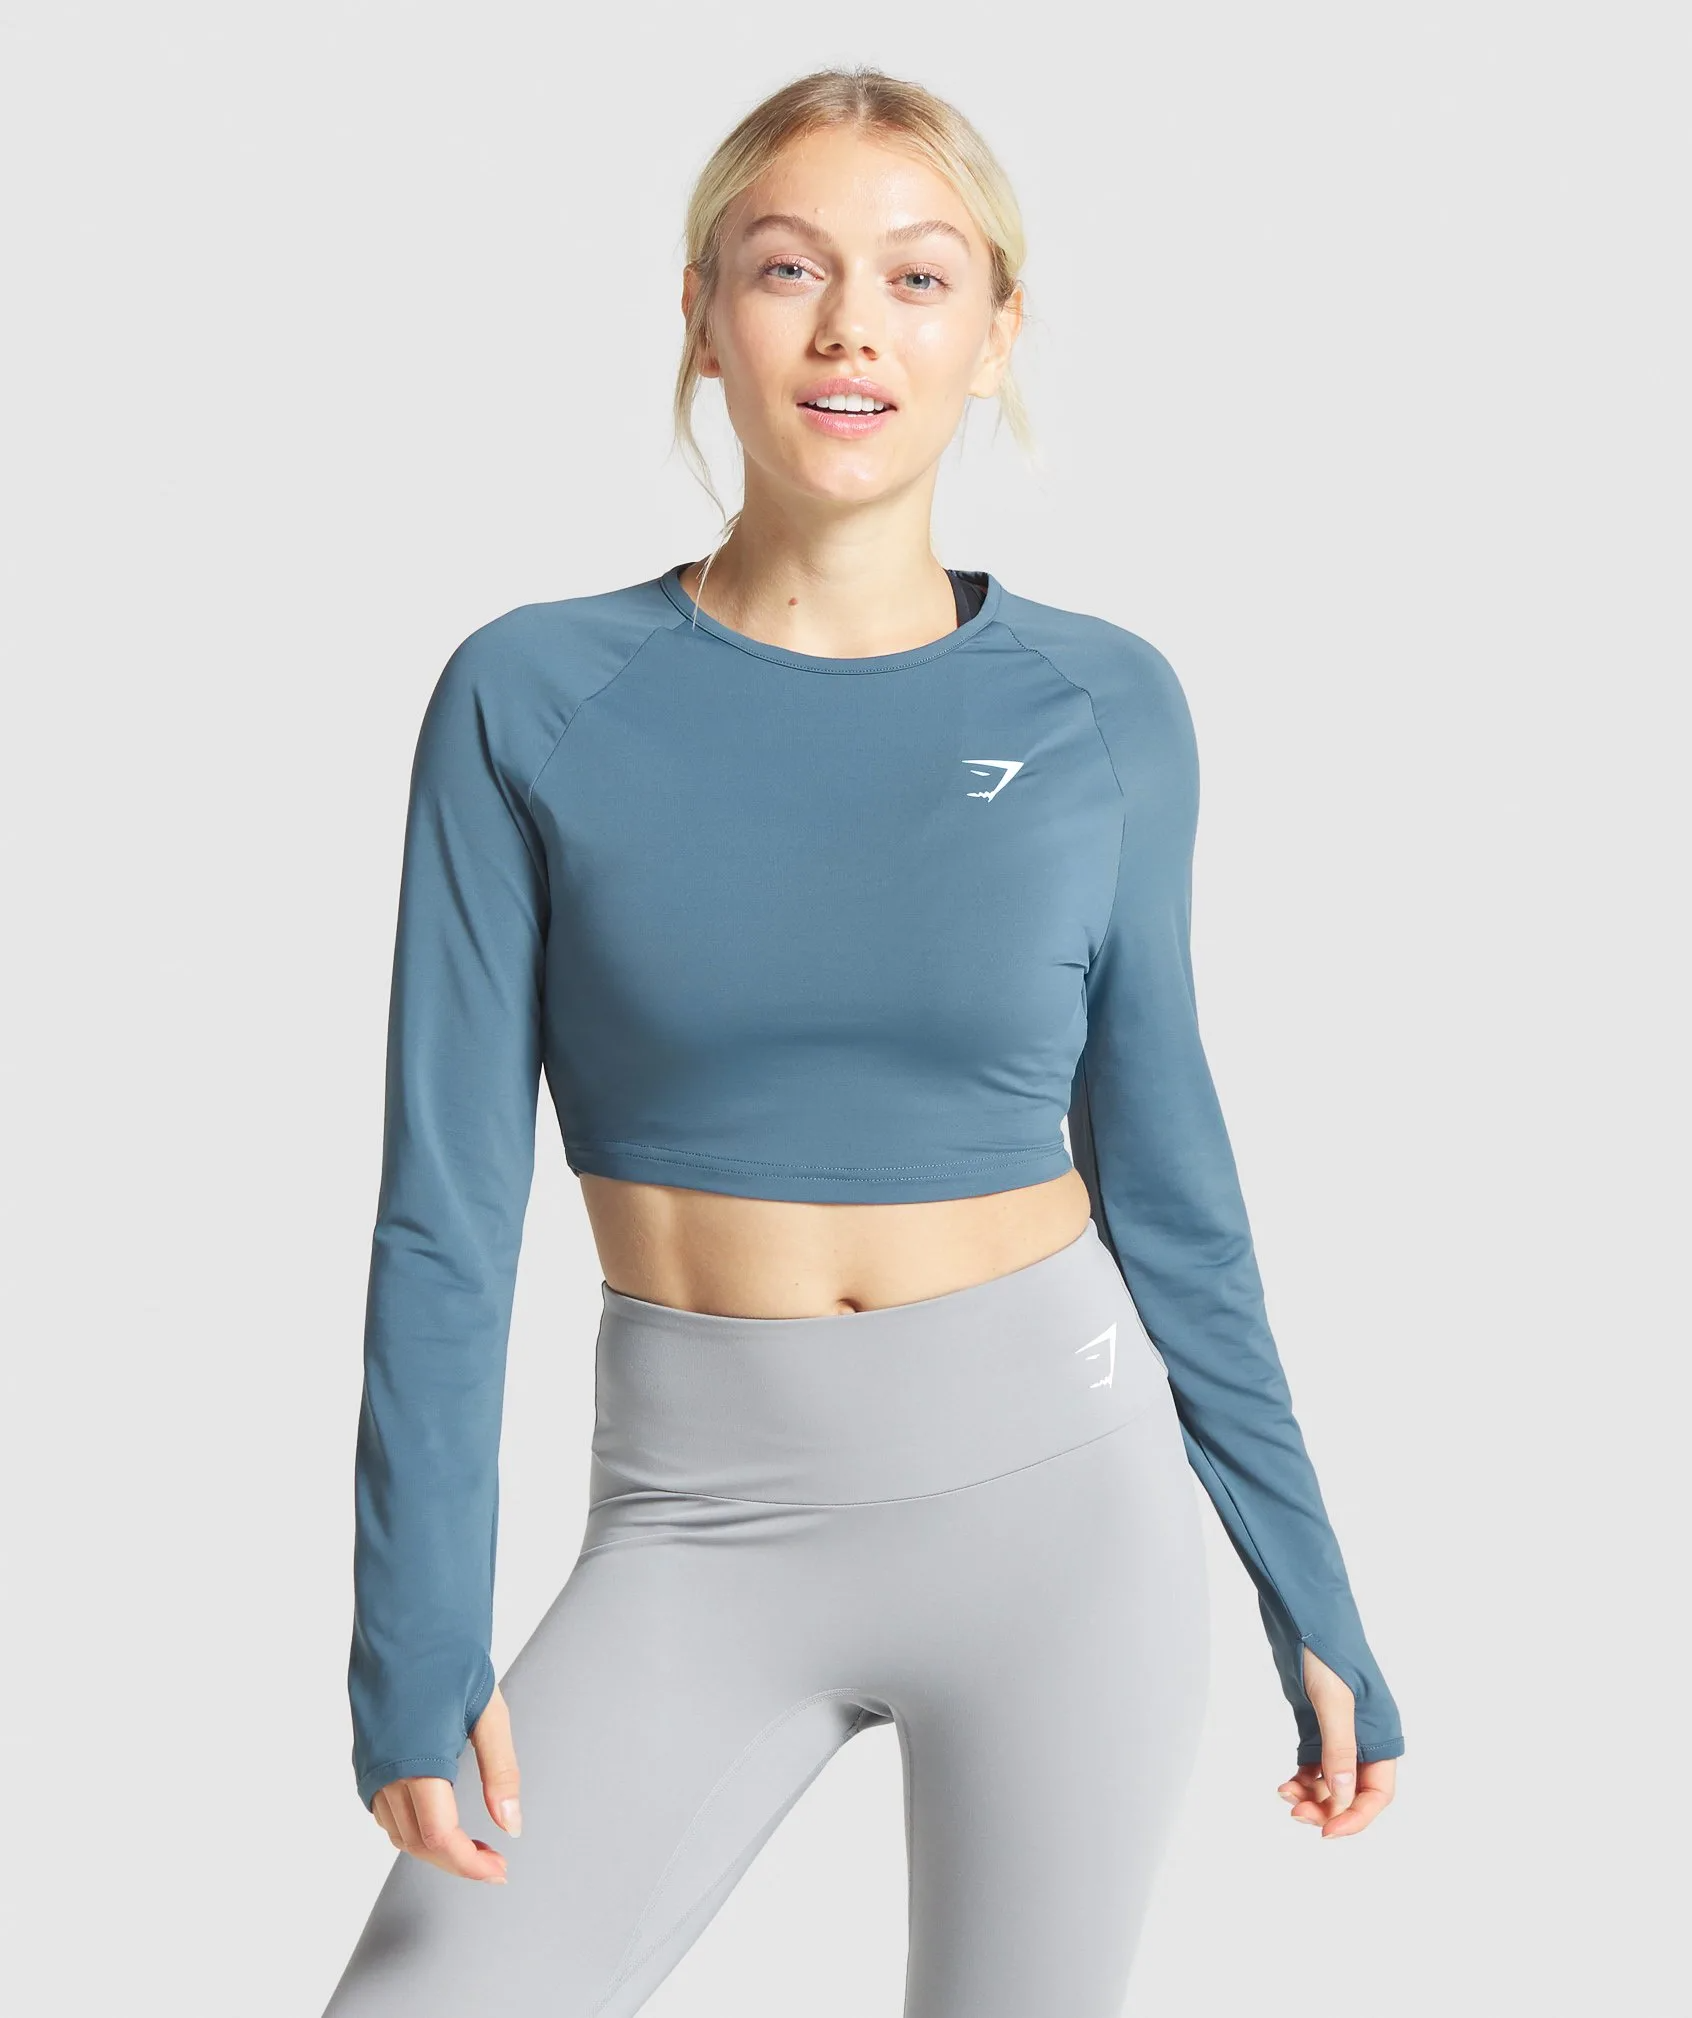 Mippo Long Sleeve Workout Crop Tops for Women Open Back Yoga Shirts Athletic Shirts 